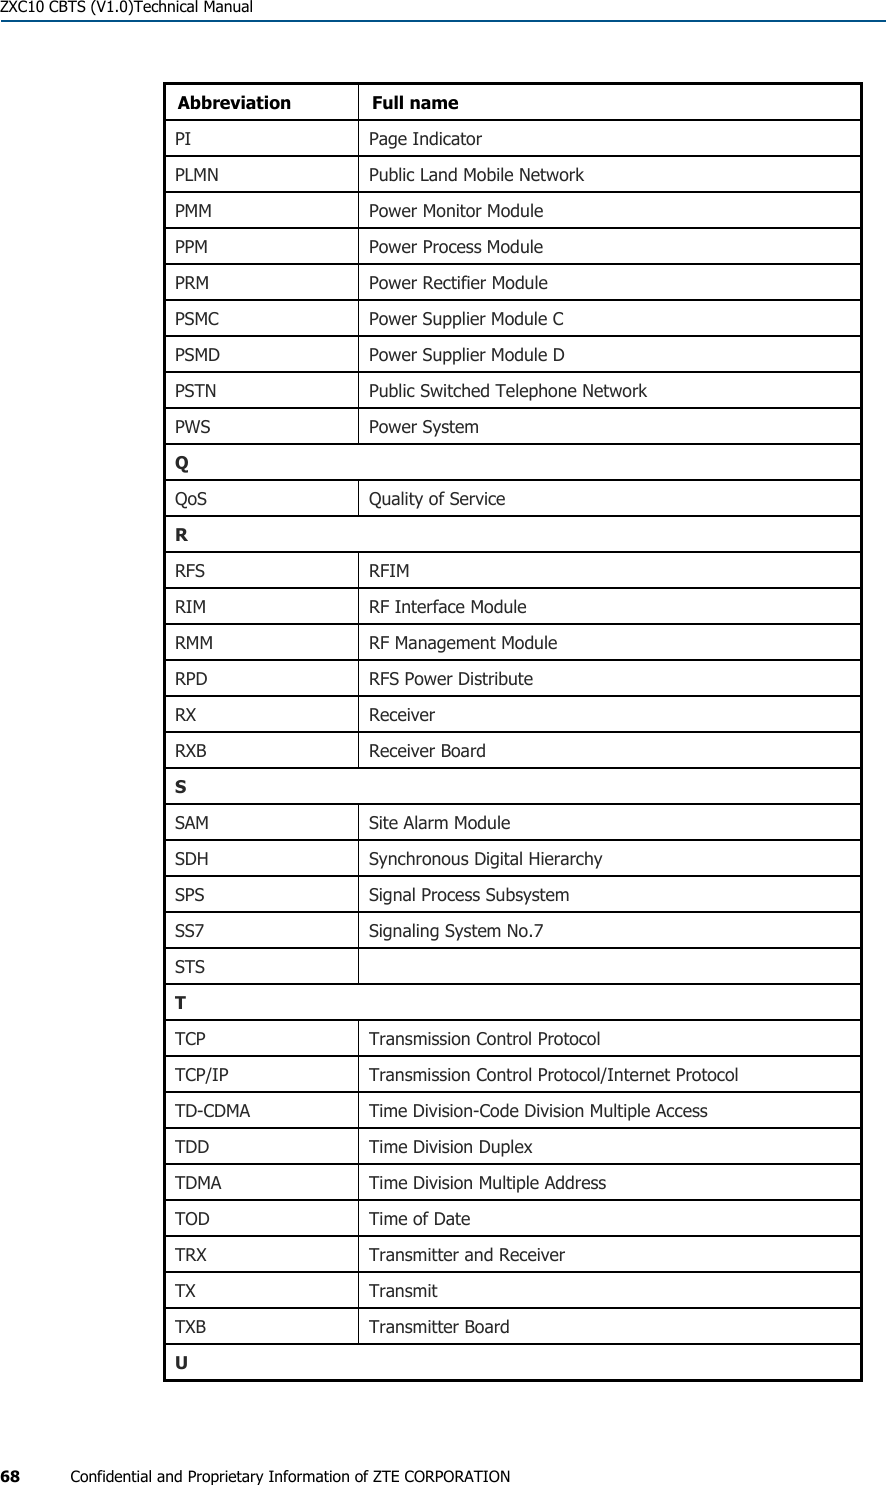  ZXC10 CBTS (V1.0)Technical Manual 68  Confidential and Proprietary Information of ZTE CORPORATION Abbreviation Full name PI Page Indicator PLMN  Public Land Mobile Network PMM Power Monitor Module PPM Power Process Module PRM Power Rectifier Module PSMC  Power Supplier Module C PSMD  Power Supplier Module D PSTN  Public Switched Telephone Network PWS Power System Q QoS  Quality of Service R RFS RFIM RIM  RF Interface Module RMM  RF Management Module RPD RFS Power Distribute RX Receiver RXB Receiver Board S SAM Site Alarm Module SDH  Synchronous Digital Hierarchy SPS  Signal Process Subsystem SS7  Signaling System No.7 STS  T TCP  Transmission Control Protocol TCP/IP  Transmission Control Protocol/Internet Protocol TD-CDMA  Time Division-Code Division Multiple Access TDD  Time Division Duplex TDMA  Time Division Multiple Address TOD  Time of Date TRX  Transmitter and Receiver TX Transmit TXB Transmitter Board U 